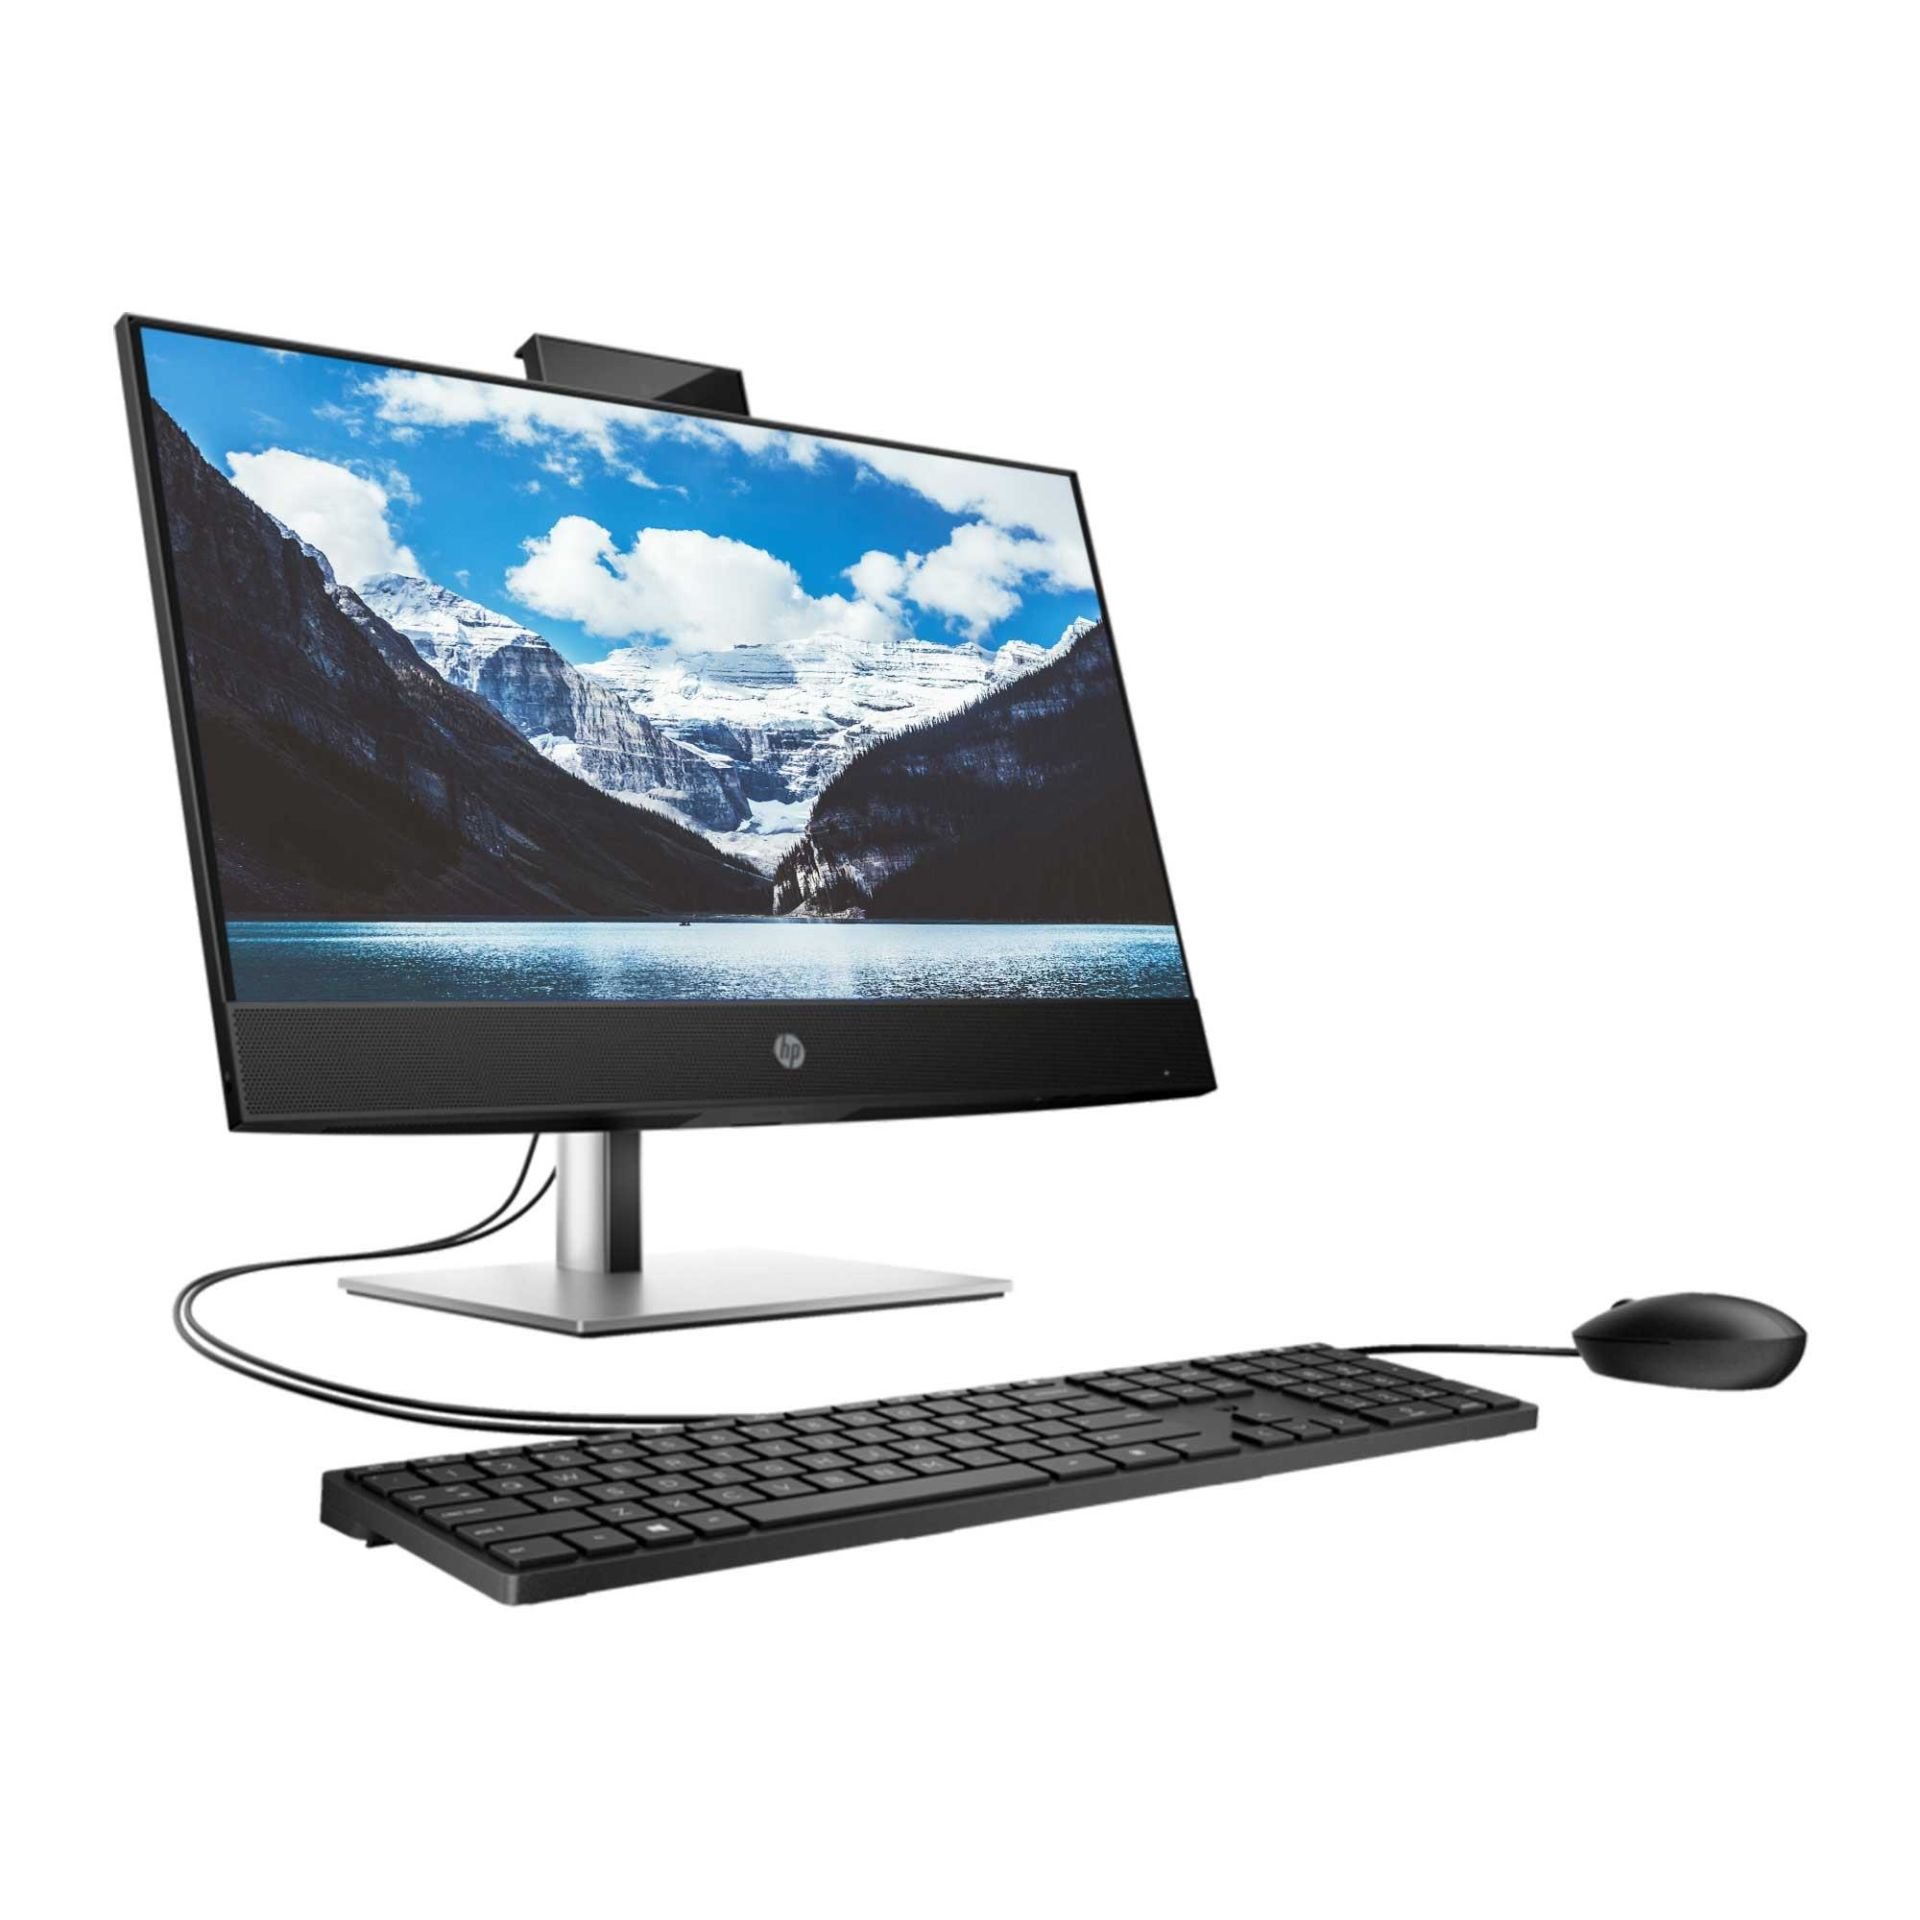 HP PROONE 440 AIO G9 884A0EA I7-13700T 16GB 512 SSD O/B VGA 23.8" NONTOUCH FREDOOS ALL IN ONE PC